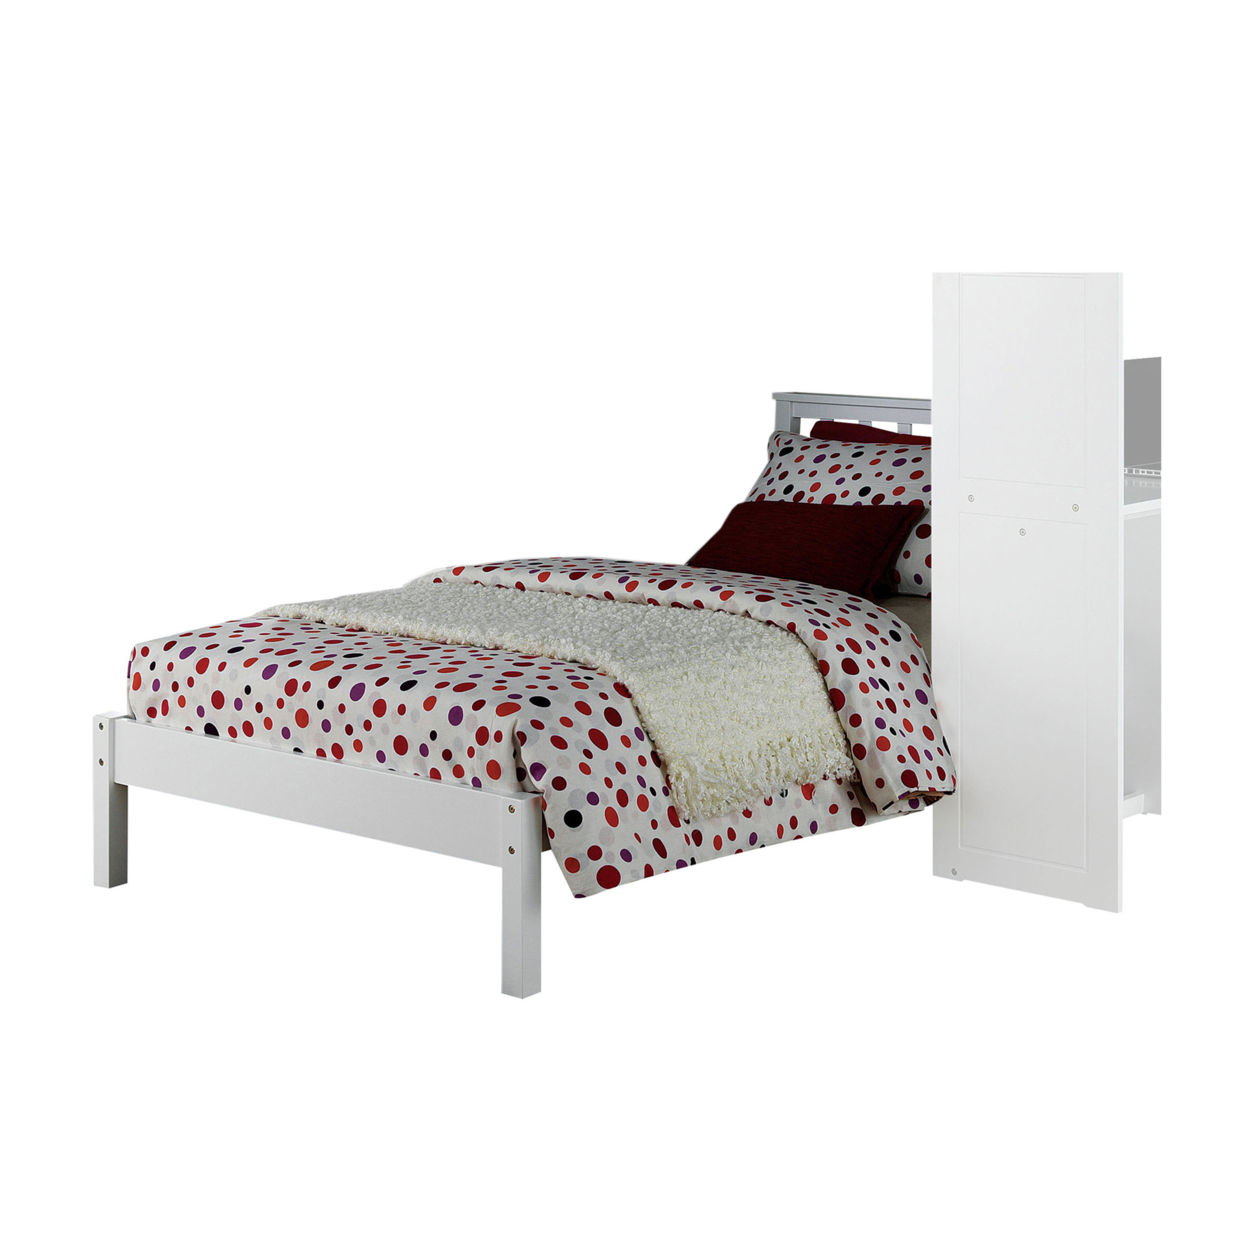 Wooden Twin Size Bed With Slated Headboard And Block Legs, White- Saltoro Sherpi